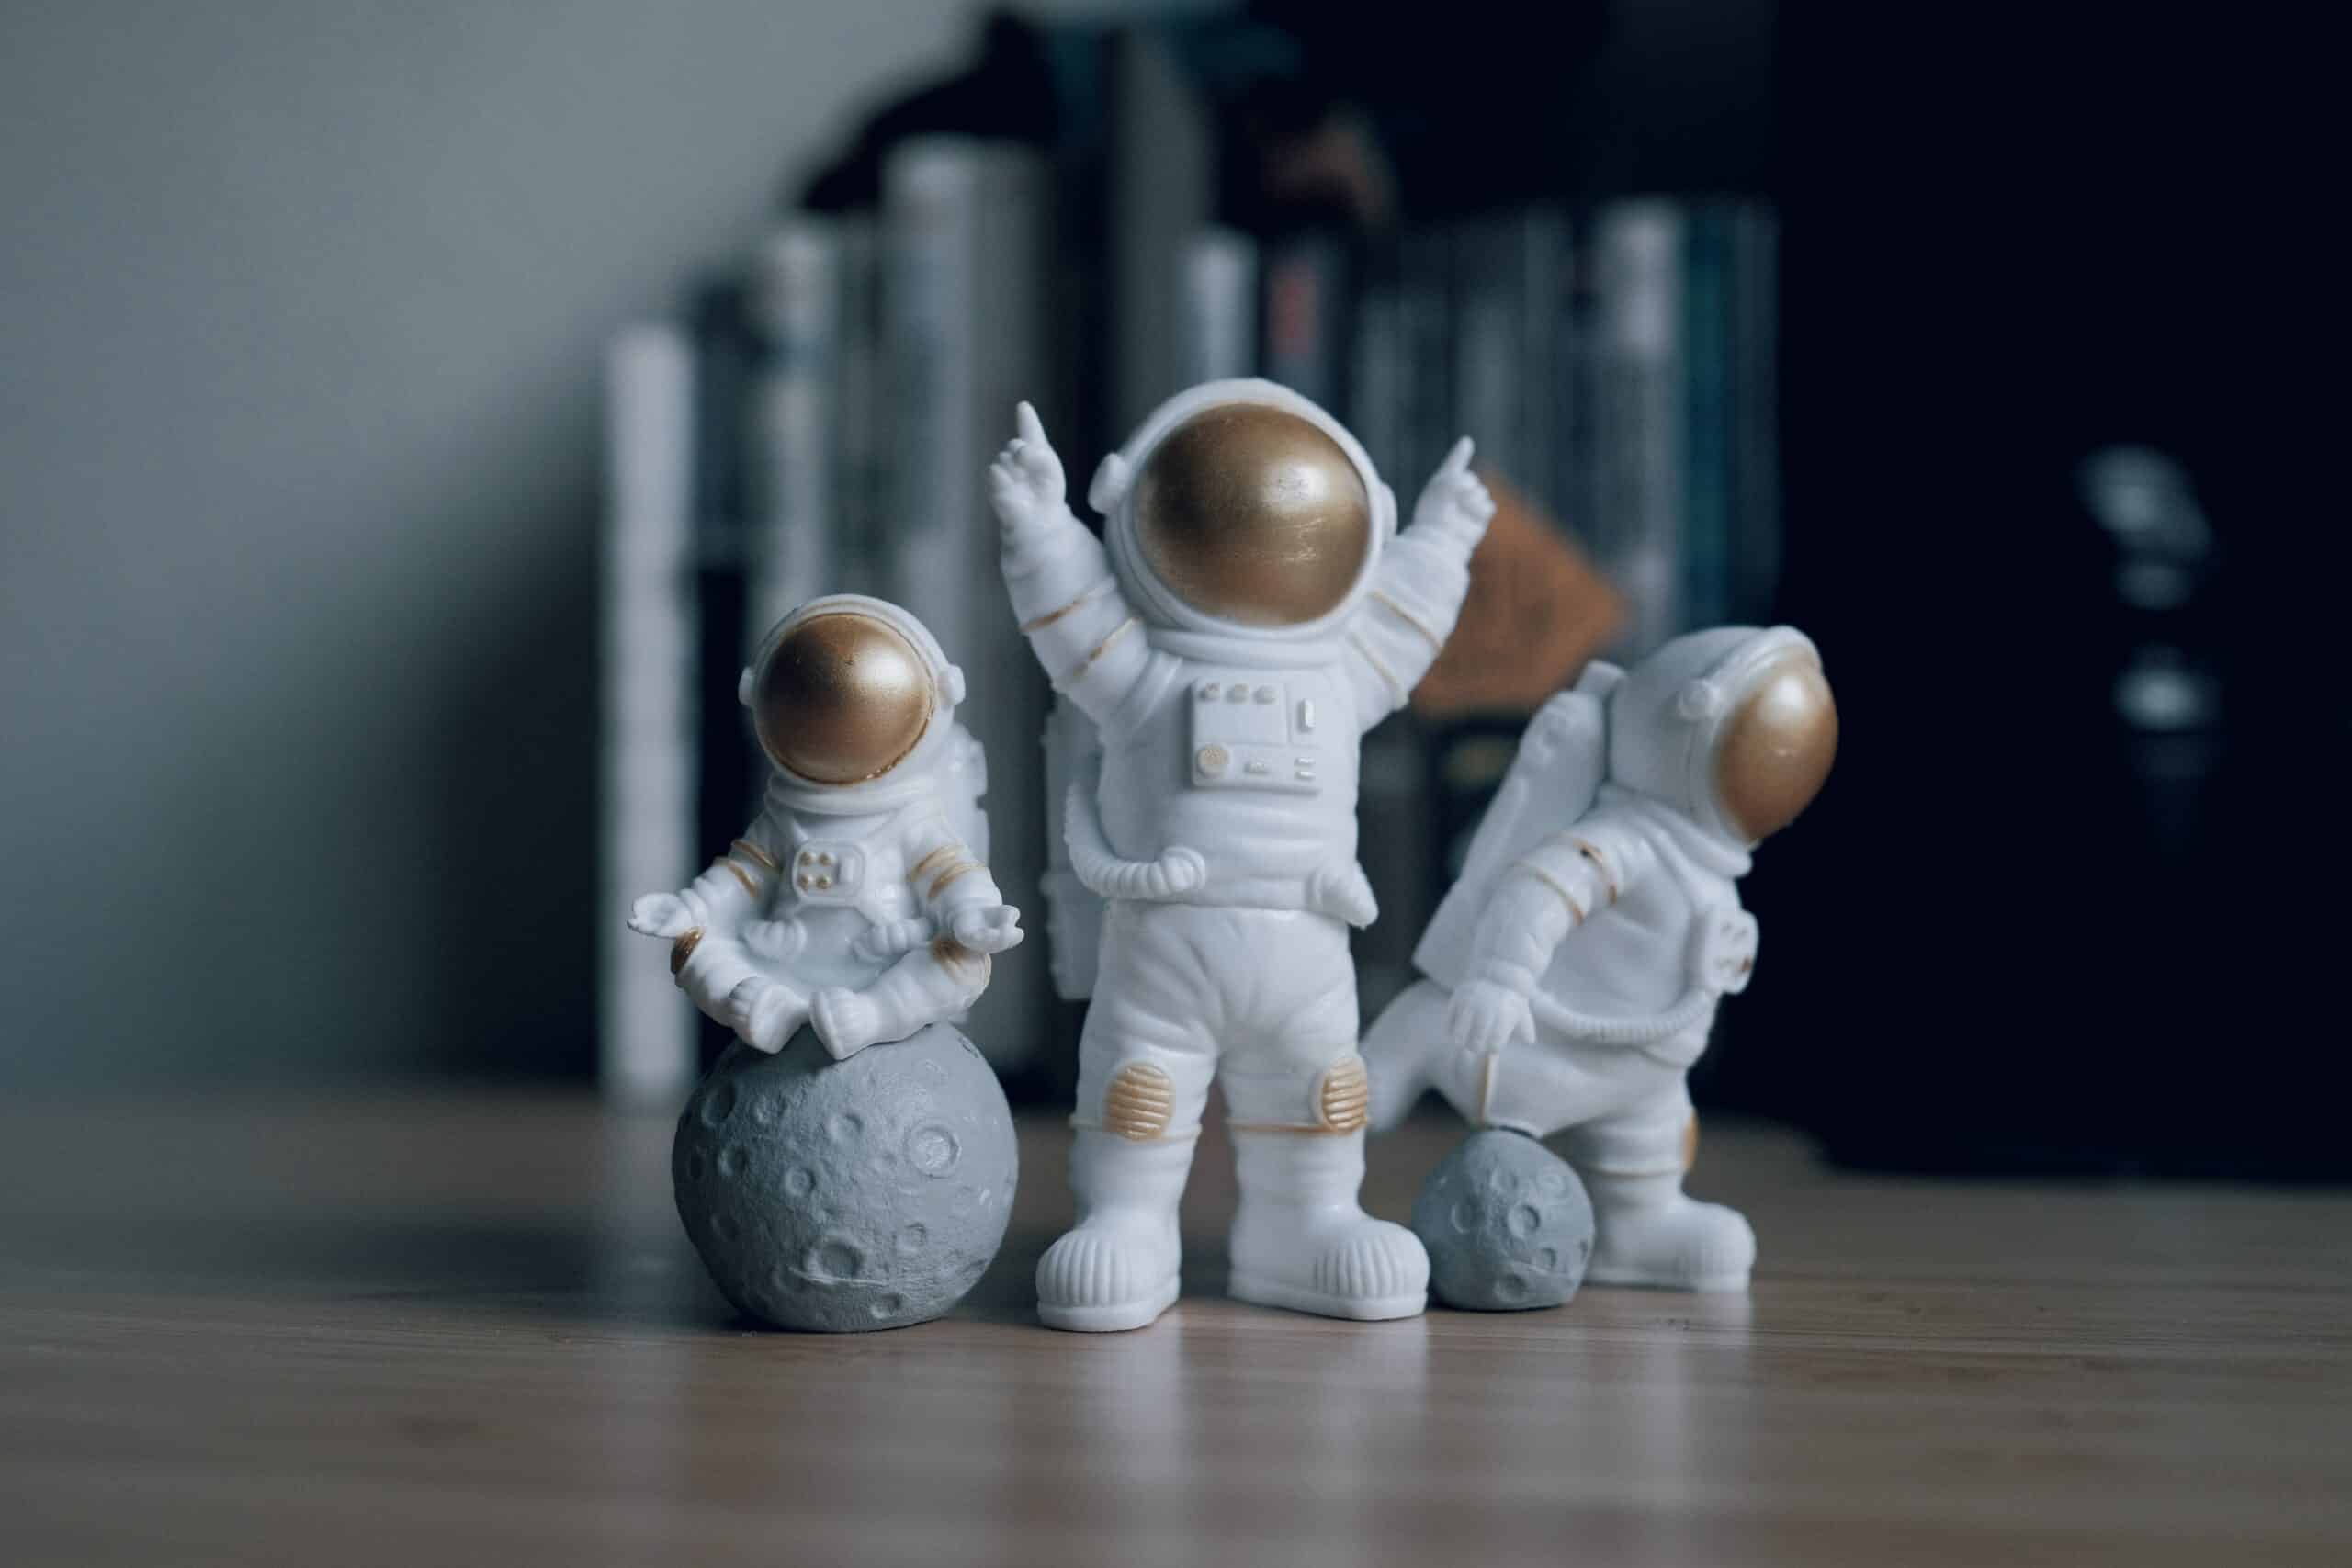 3 Astronaut figurines with one sitting on a moon, displayed on a desk with books behind them.